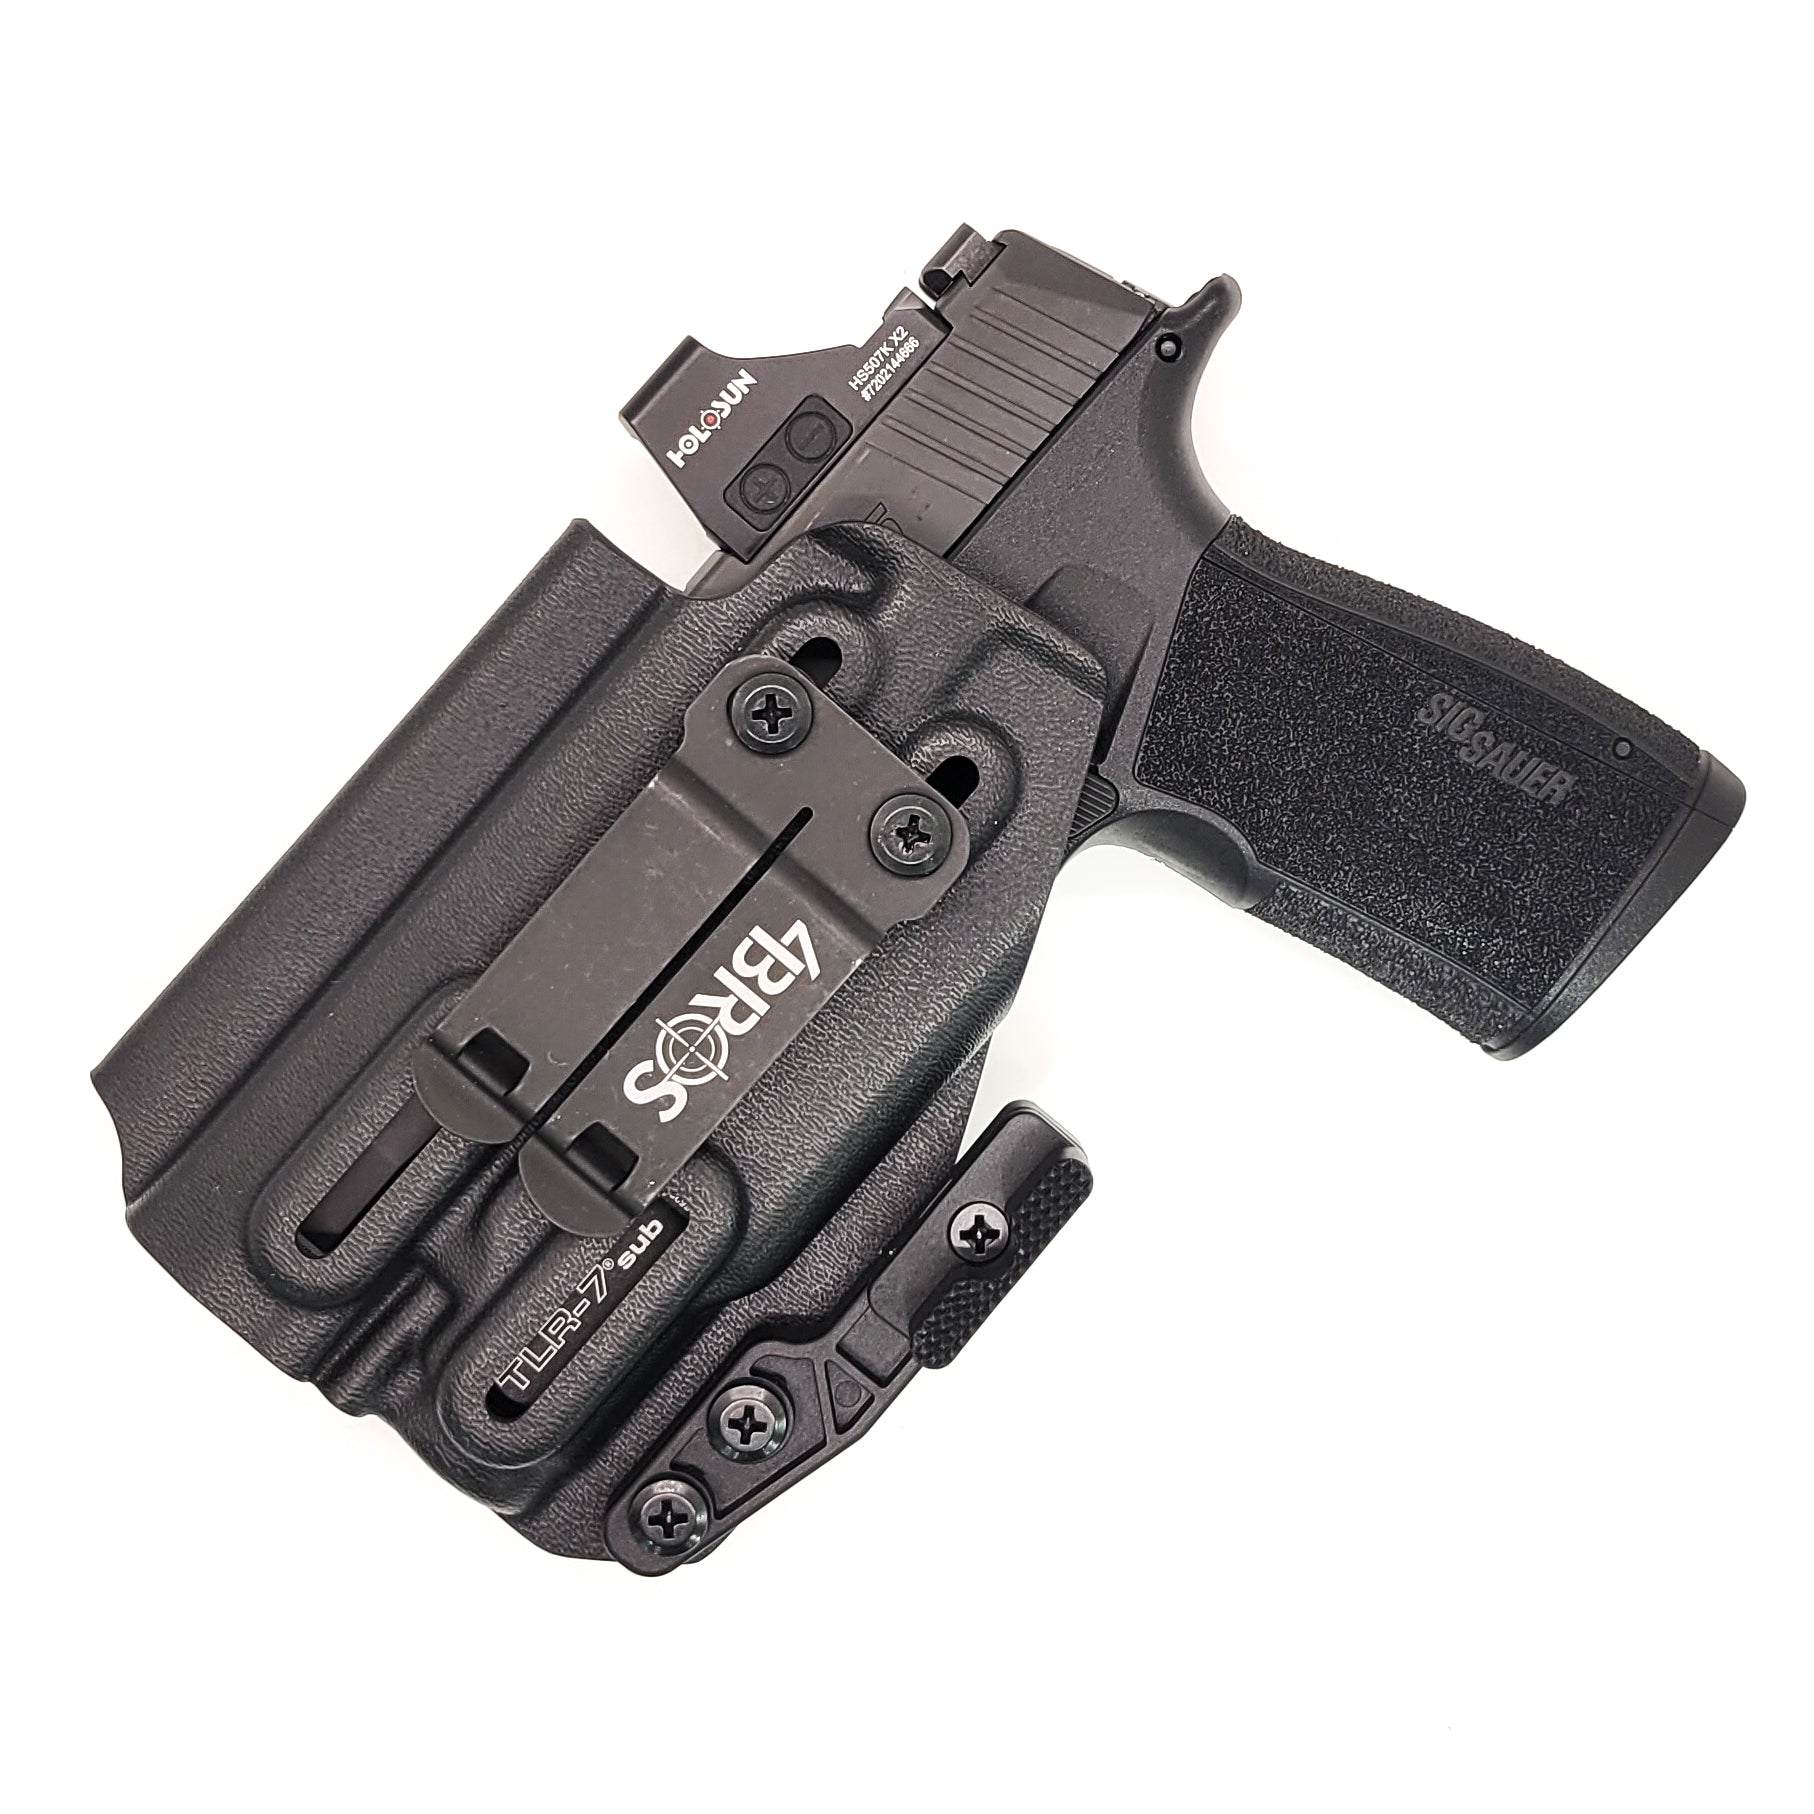 For the best Inside Waistband Kydex Holster designed to fit the Sig Sauer P365-XMACRO with Streamlight TLR-7 Sub, shop Four Brothers Holsters. Full sweat guard, adjustable retention, minimal material & smooth edges to reduce printing. Made in the USA. Open muzzle for threaded barrels, cleared for red dot sights. MACRO